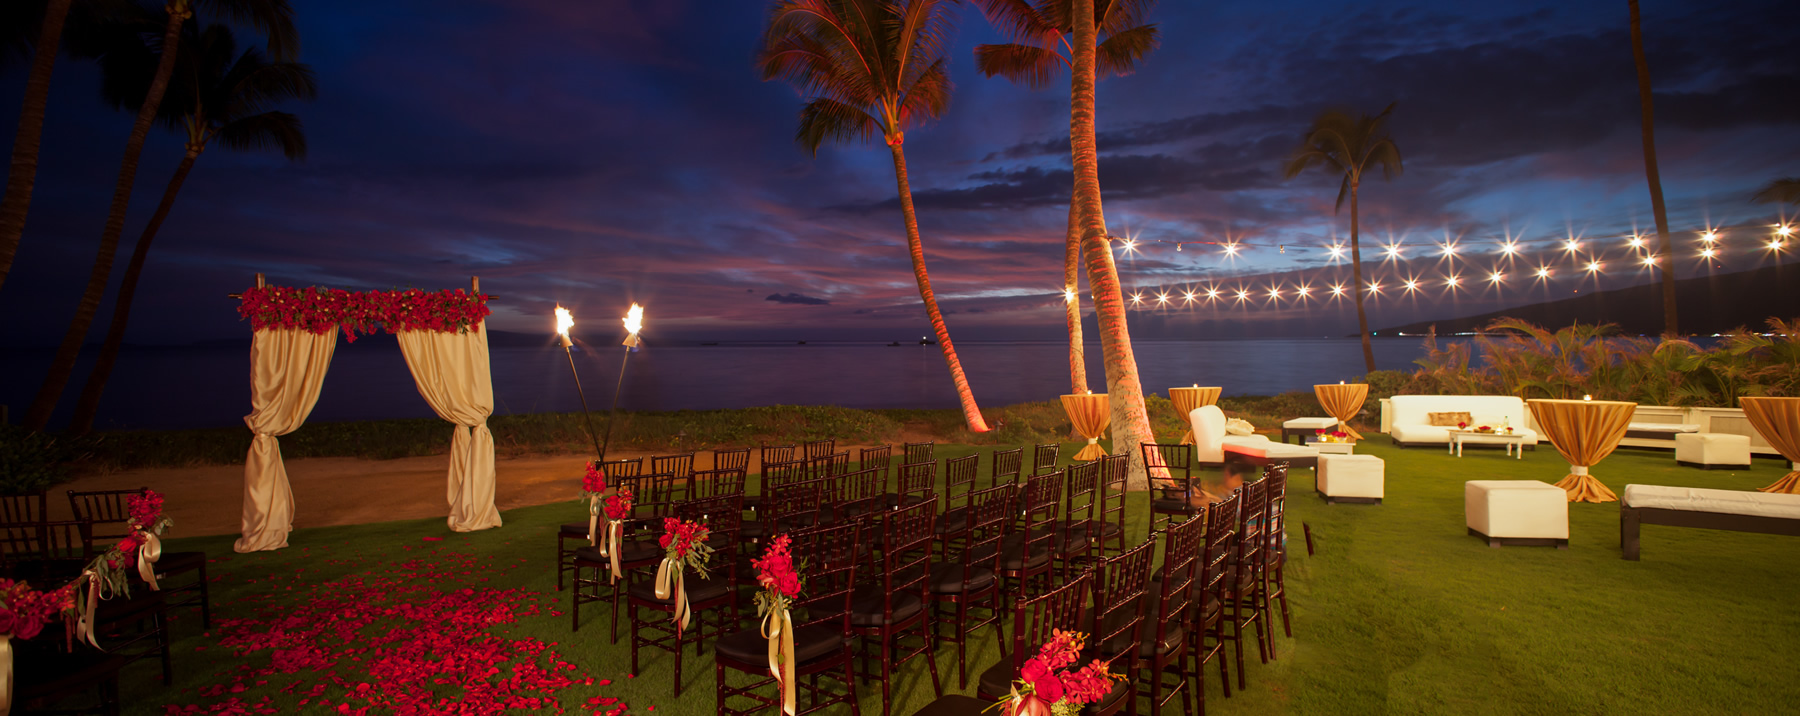 A wedding ceremony site at Sugar Beach Events in Maui Hawaii.